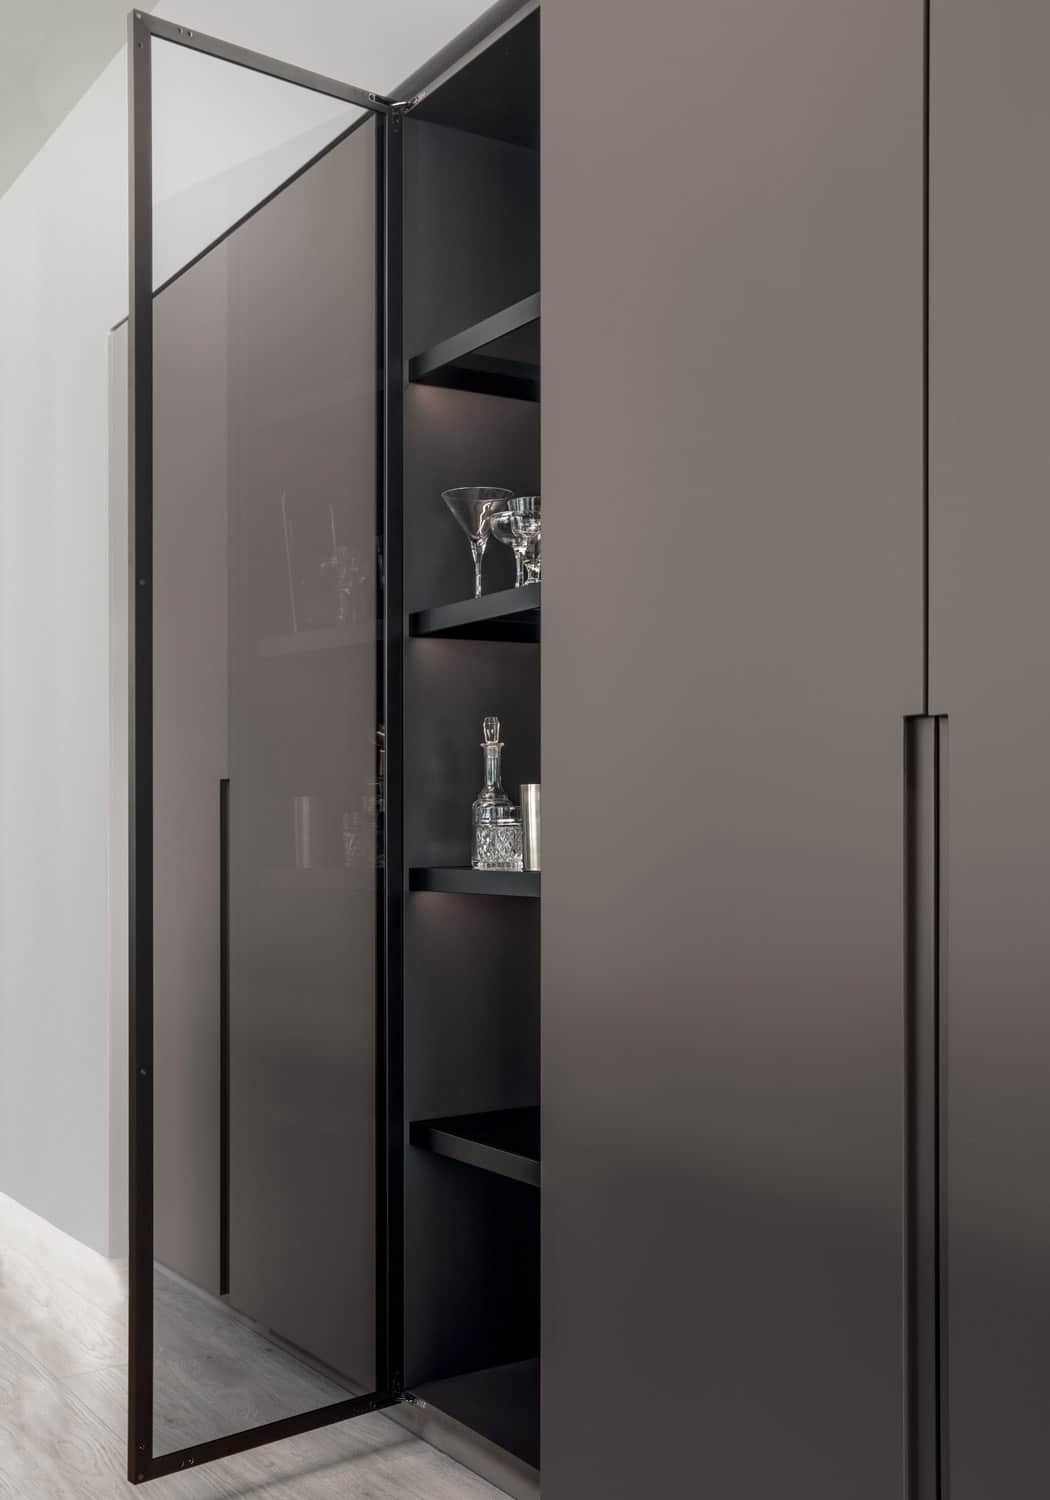 In the middle of the tall cabinets is a column with an aluminum-framed glass door. 